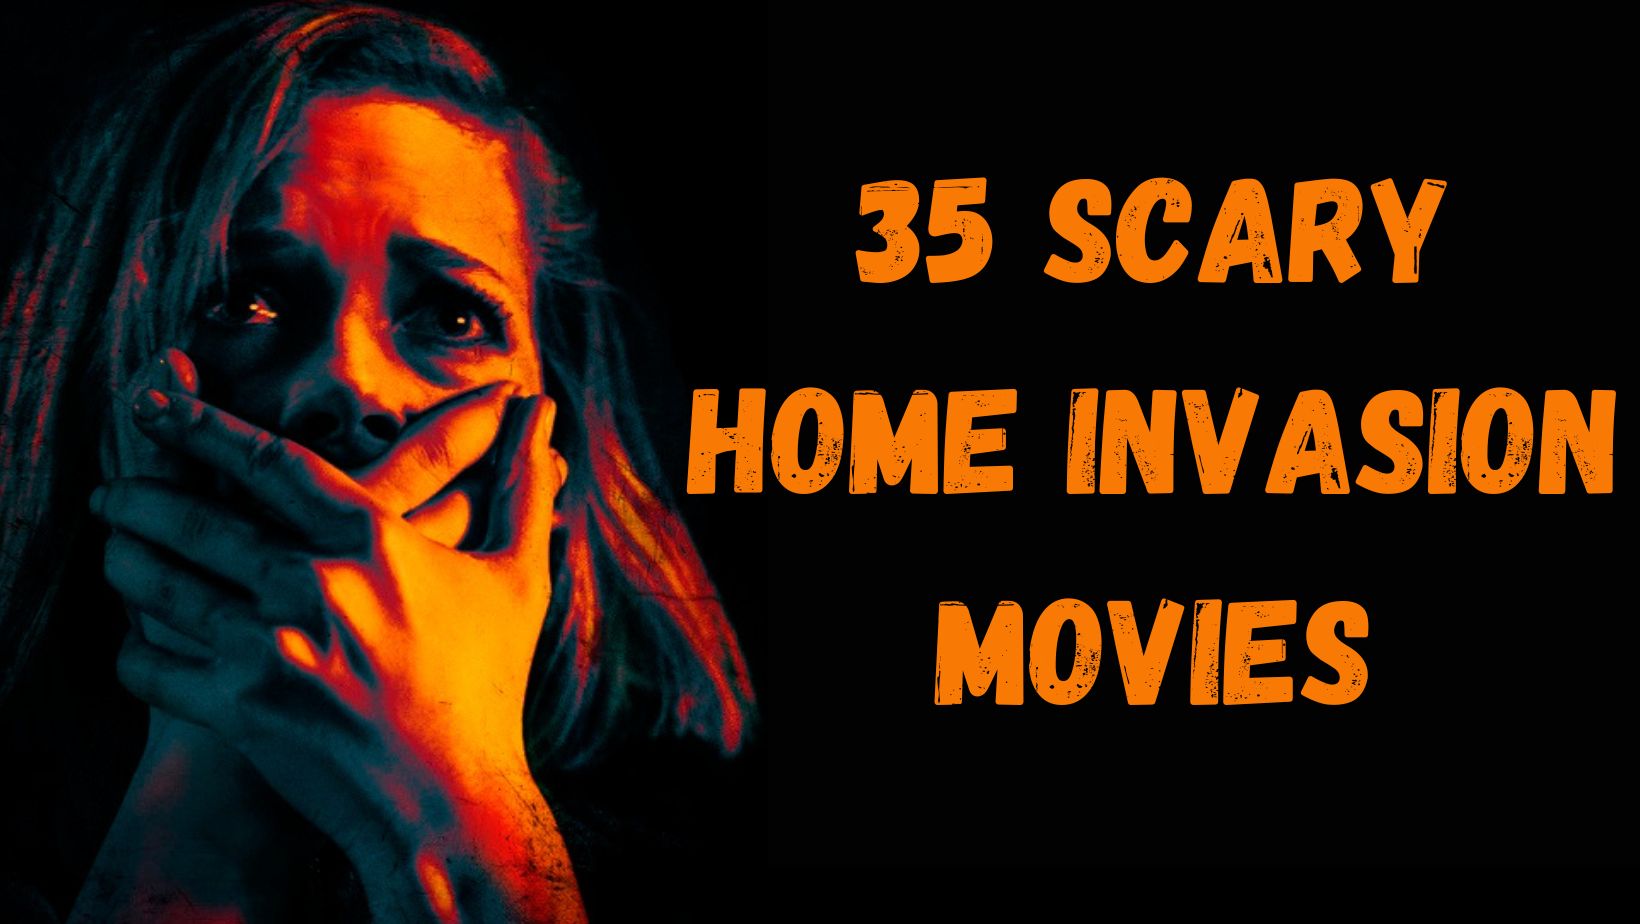 a scared woman covering her mouth with her hands. text "35 scary home invasion horror movies"